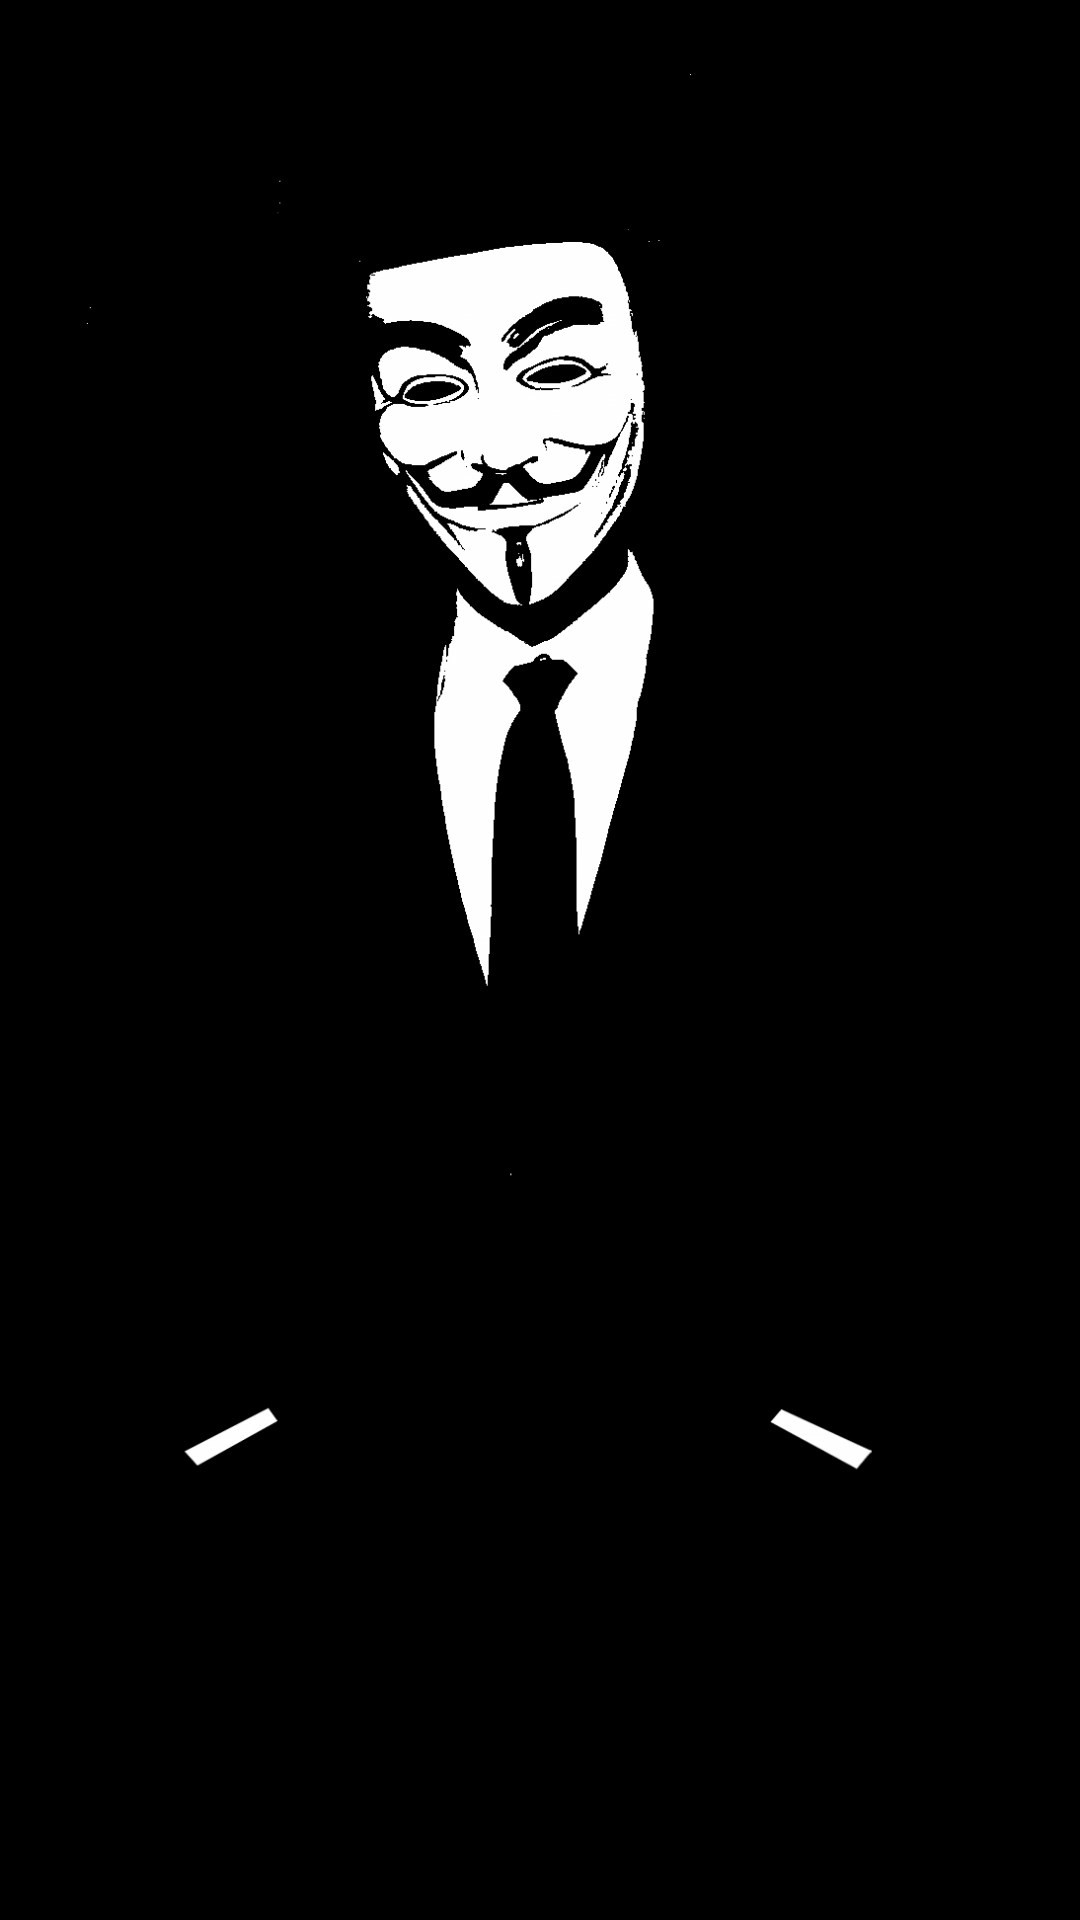 1080x1920 hd anonymous wallpaper for iphone